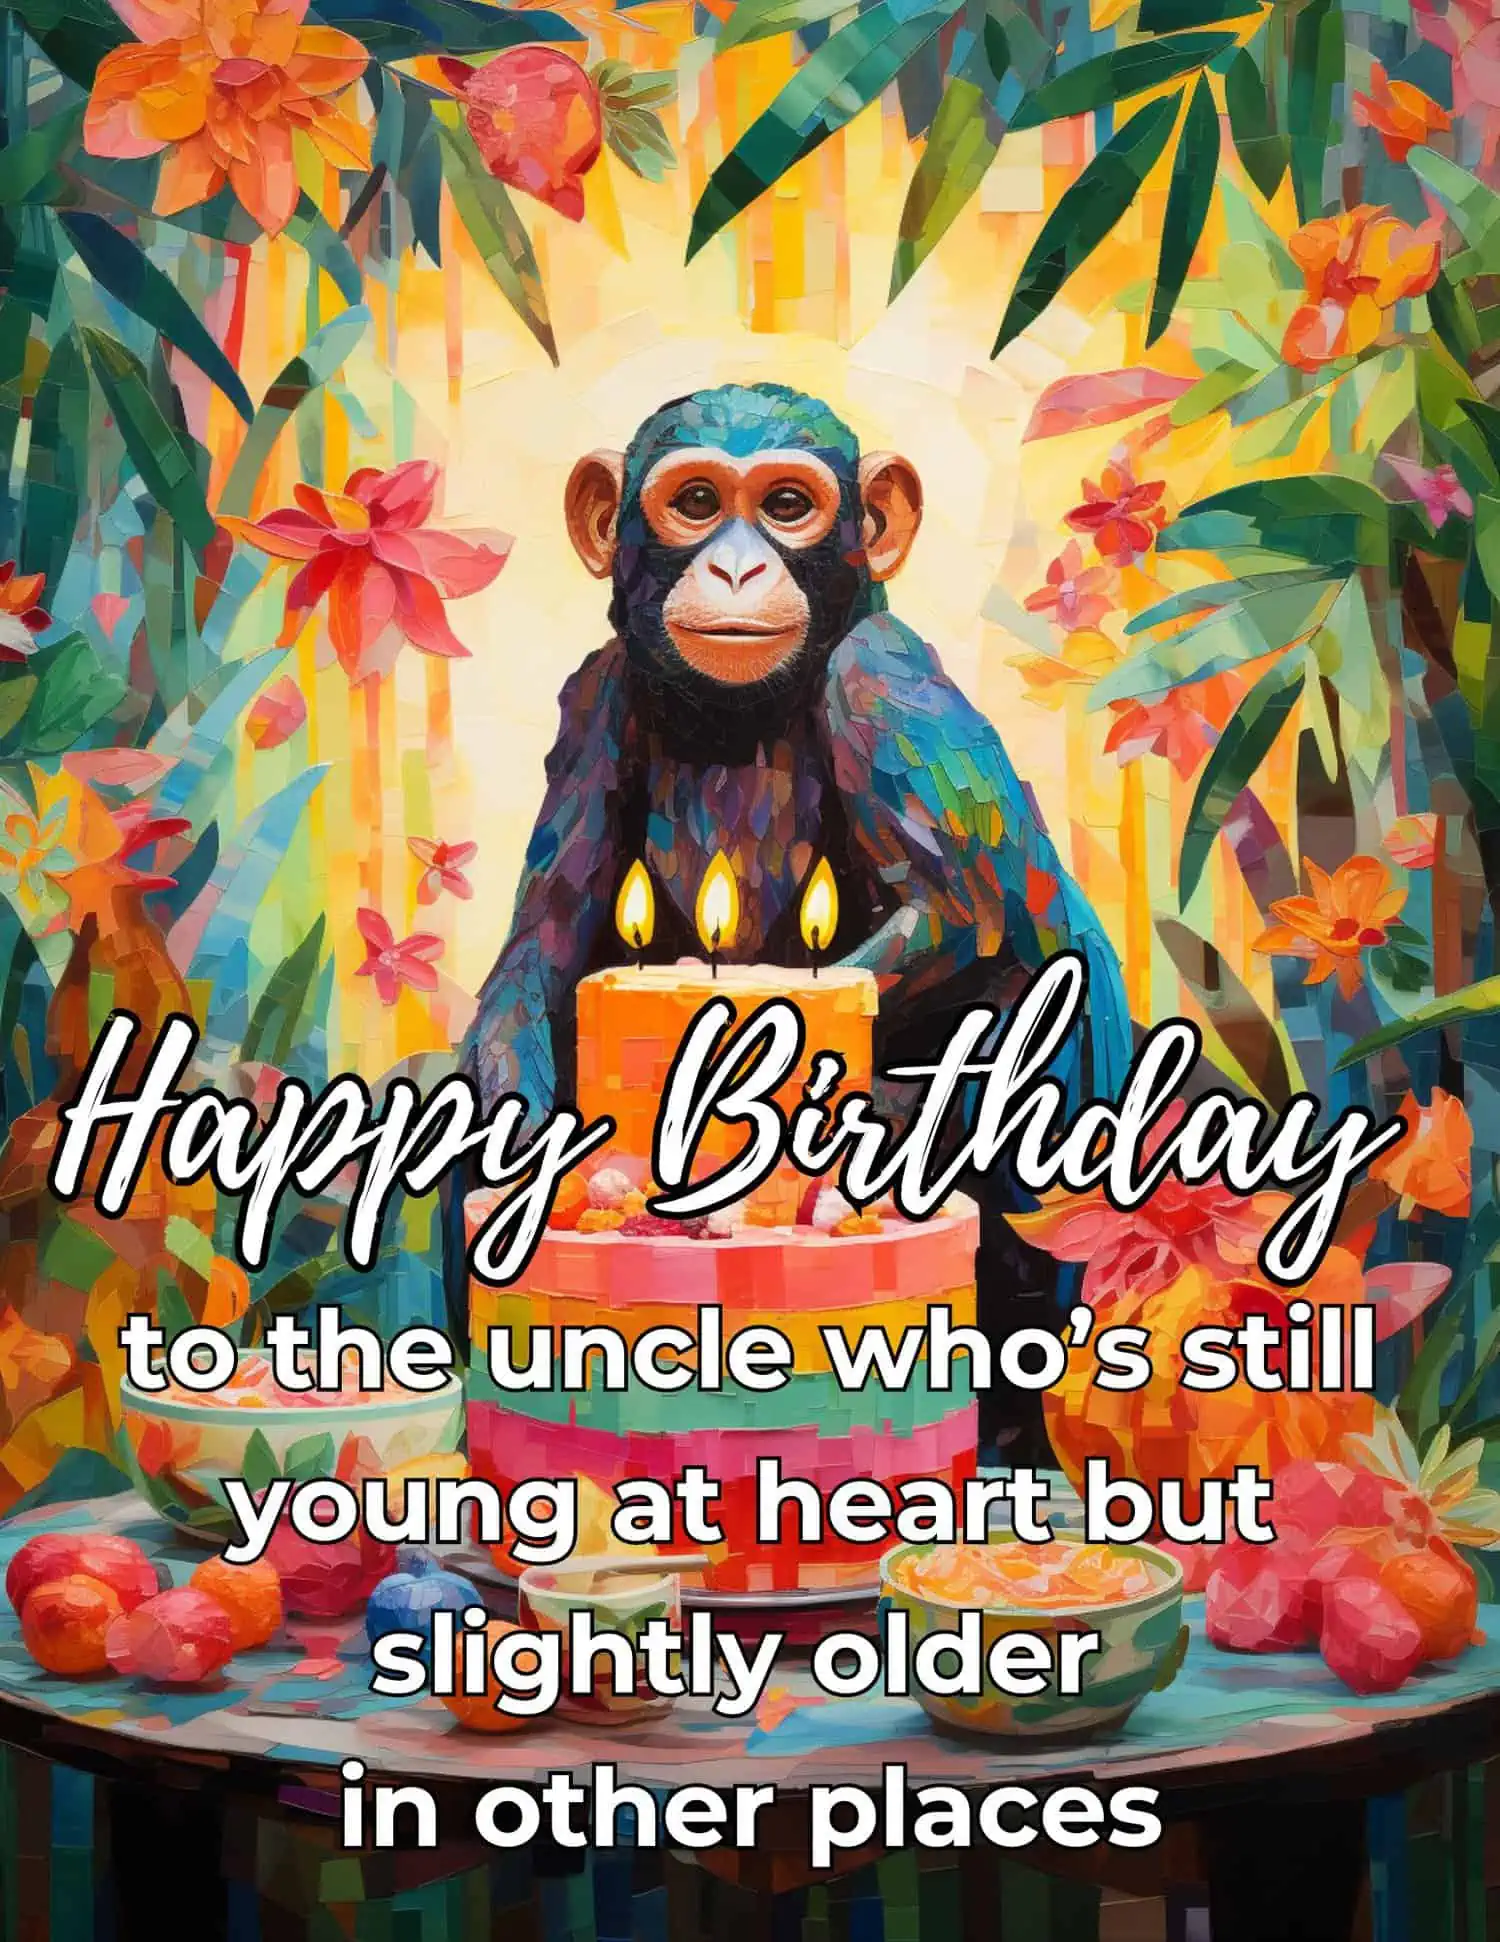 A delightful collection of humorous birthday wishes tailored for uncles, perfect for bringing laughter and joy to their special day.